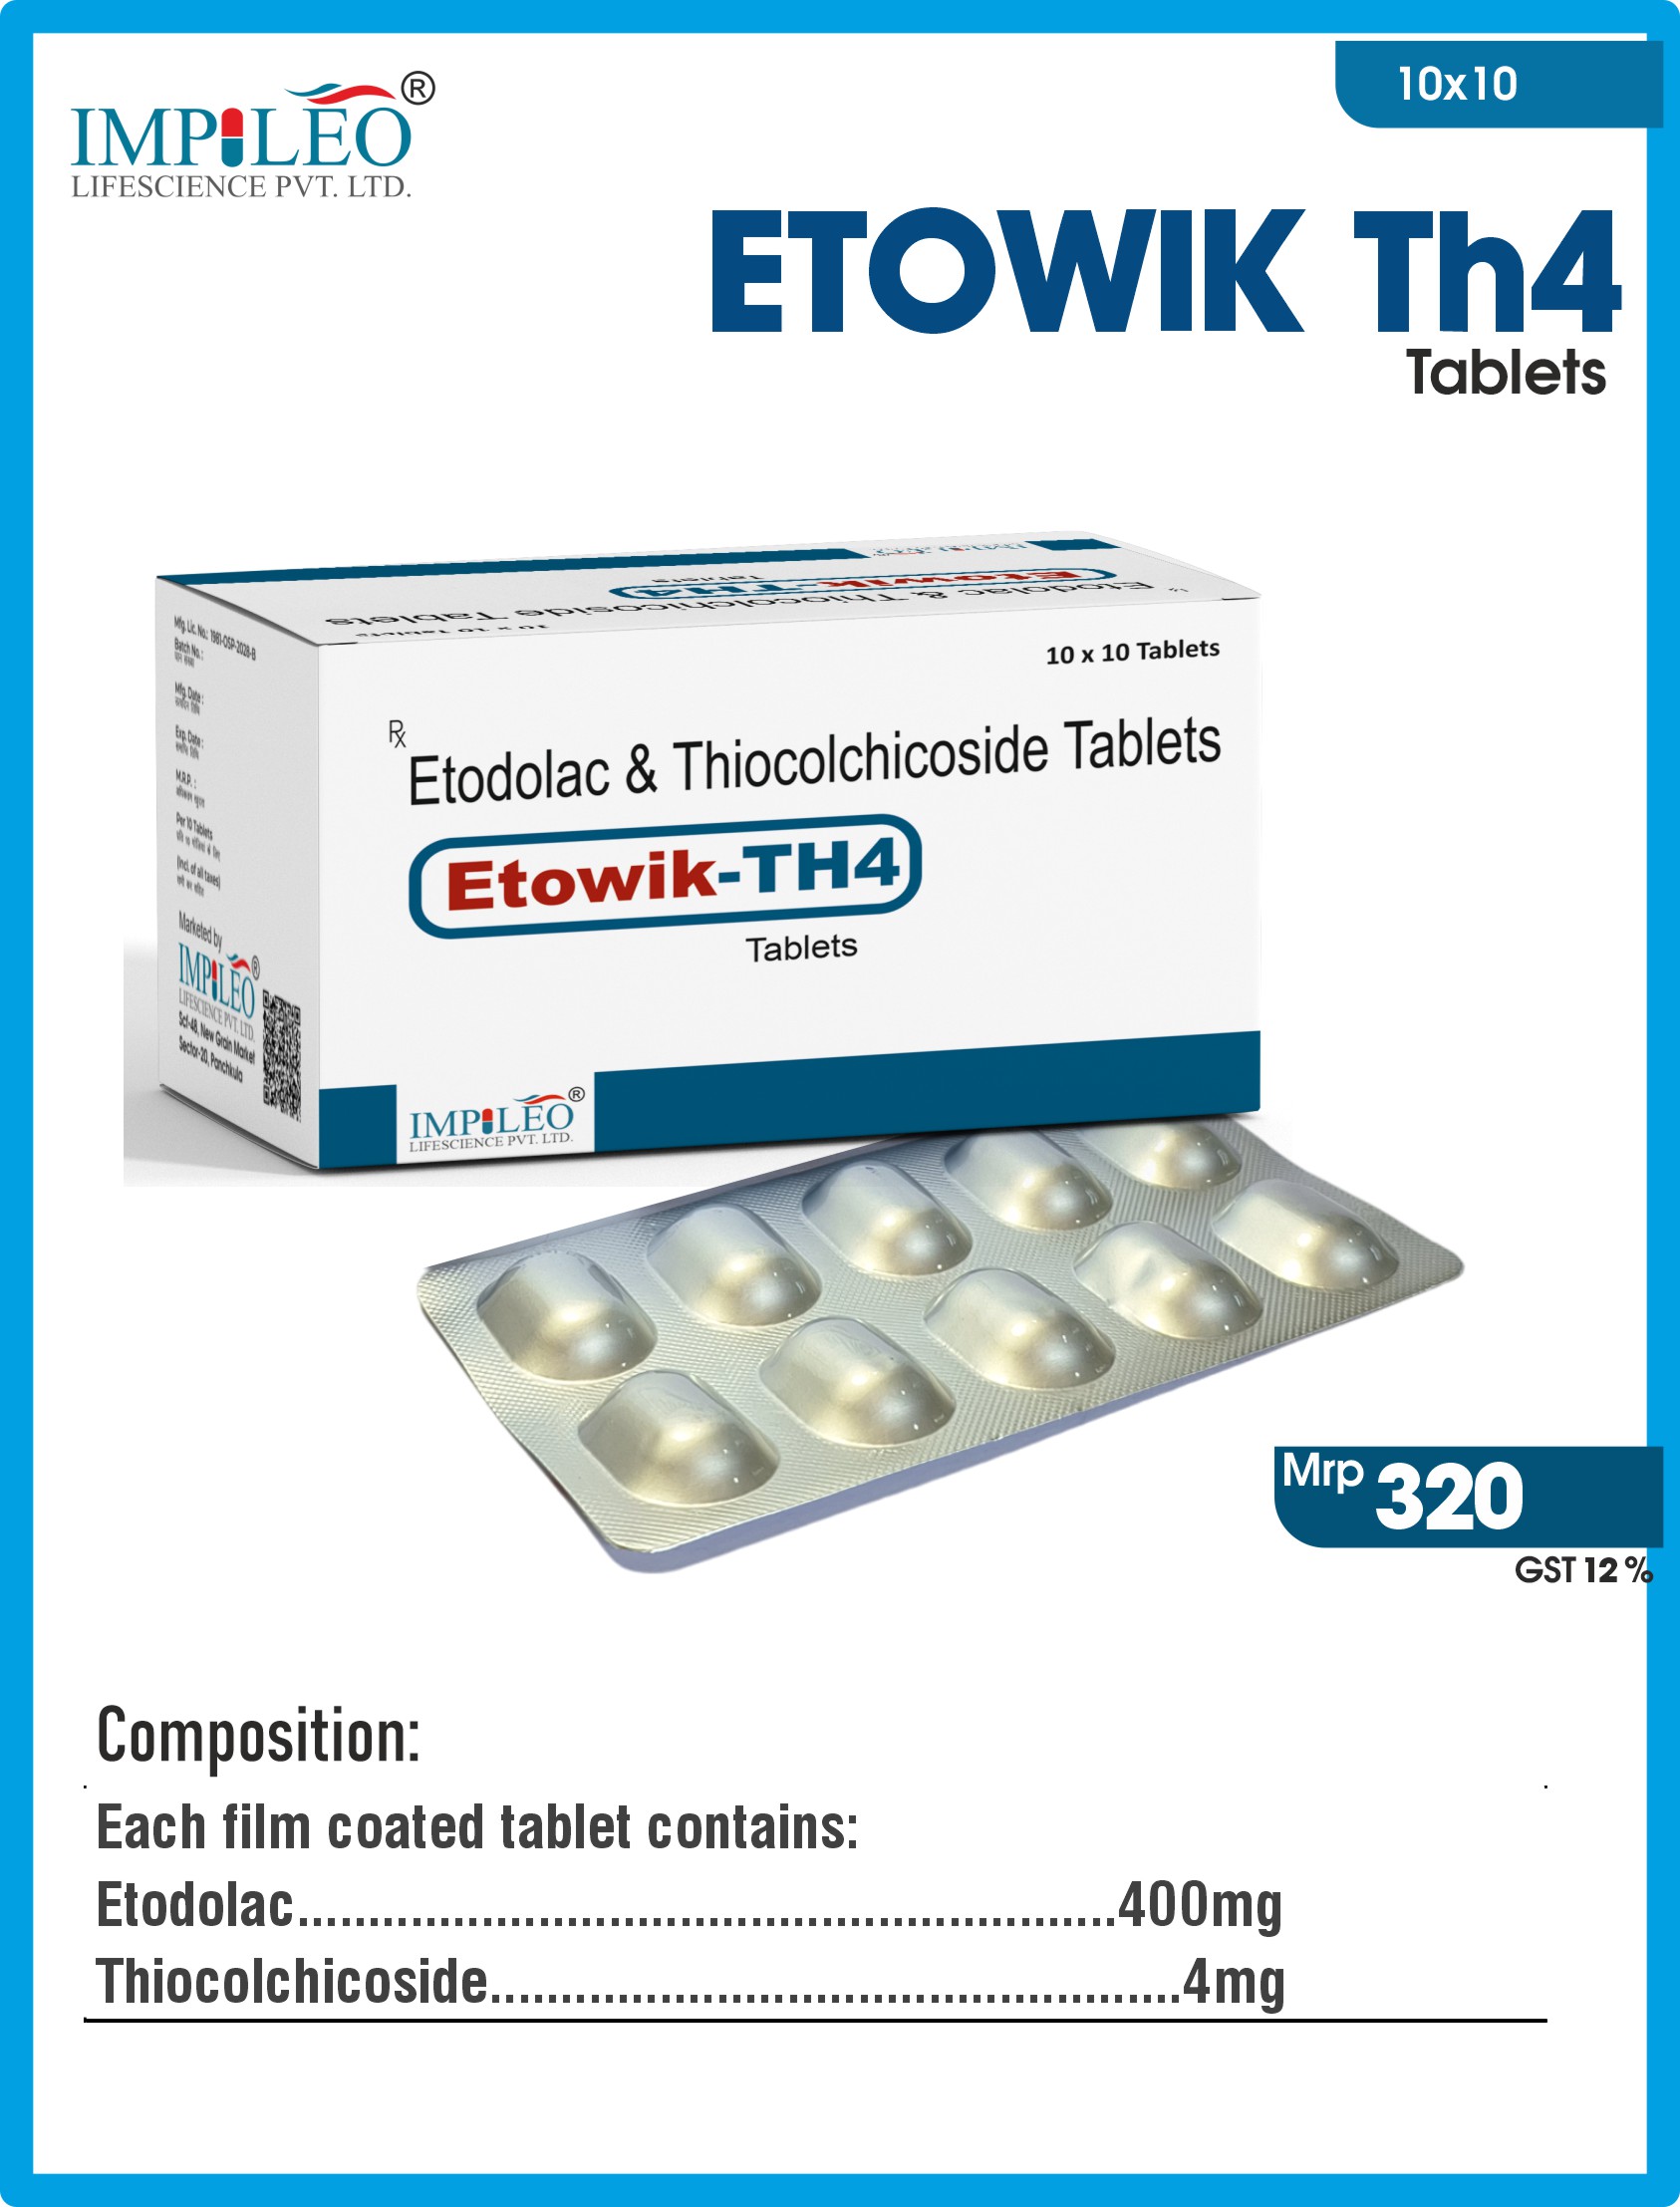 Unlock Superior Relief: ETOWIK TH4 Tablets - Etodolac & Thiocolchicoside from Top PCD Pharma Franchise in Chandigarh